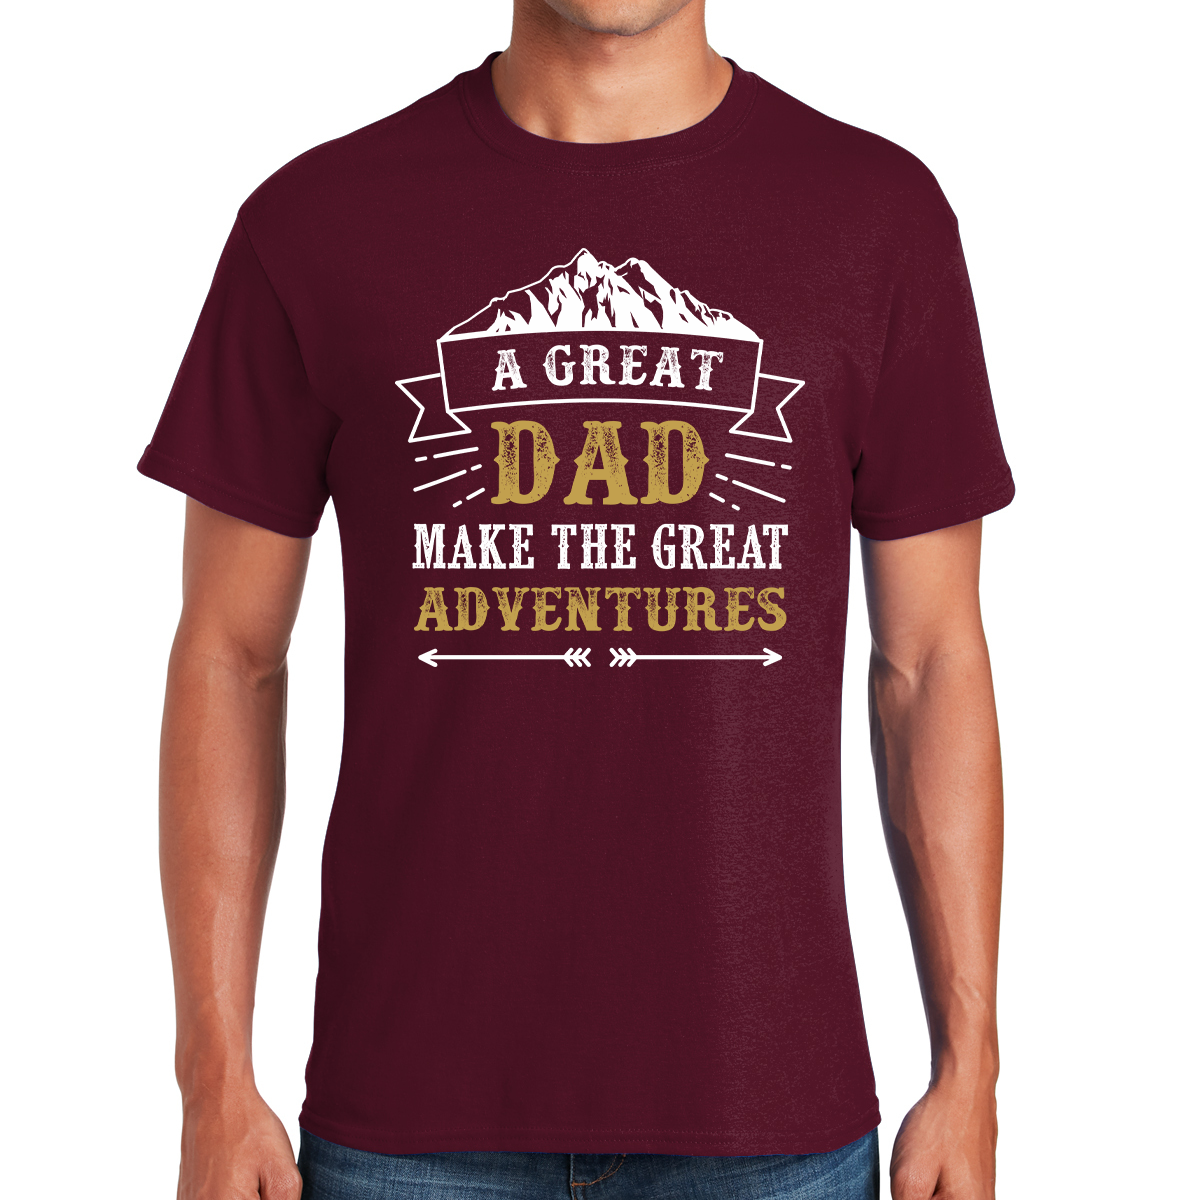 A Great Dad Make The Great Adventures Awesome Dad T-shirt